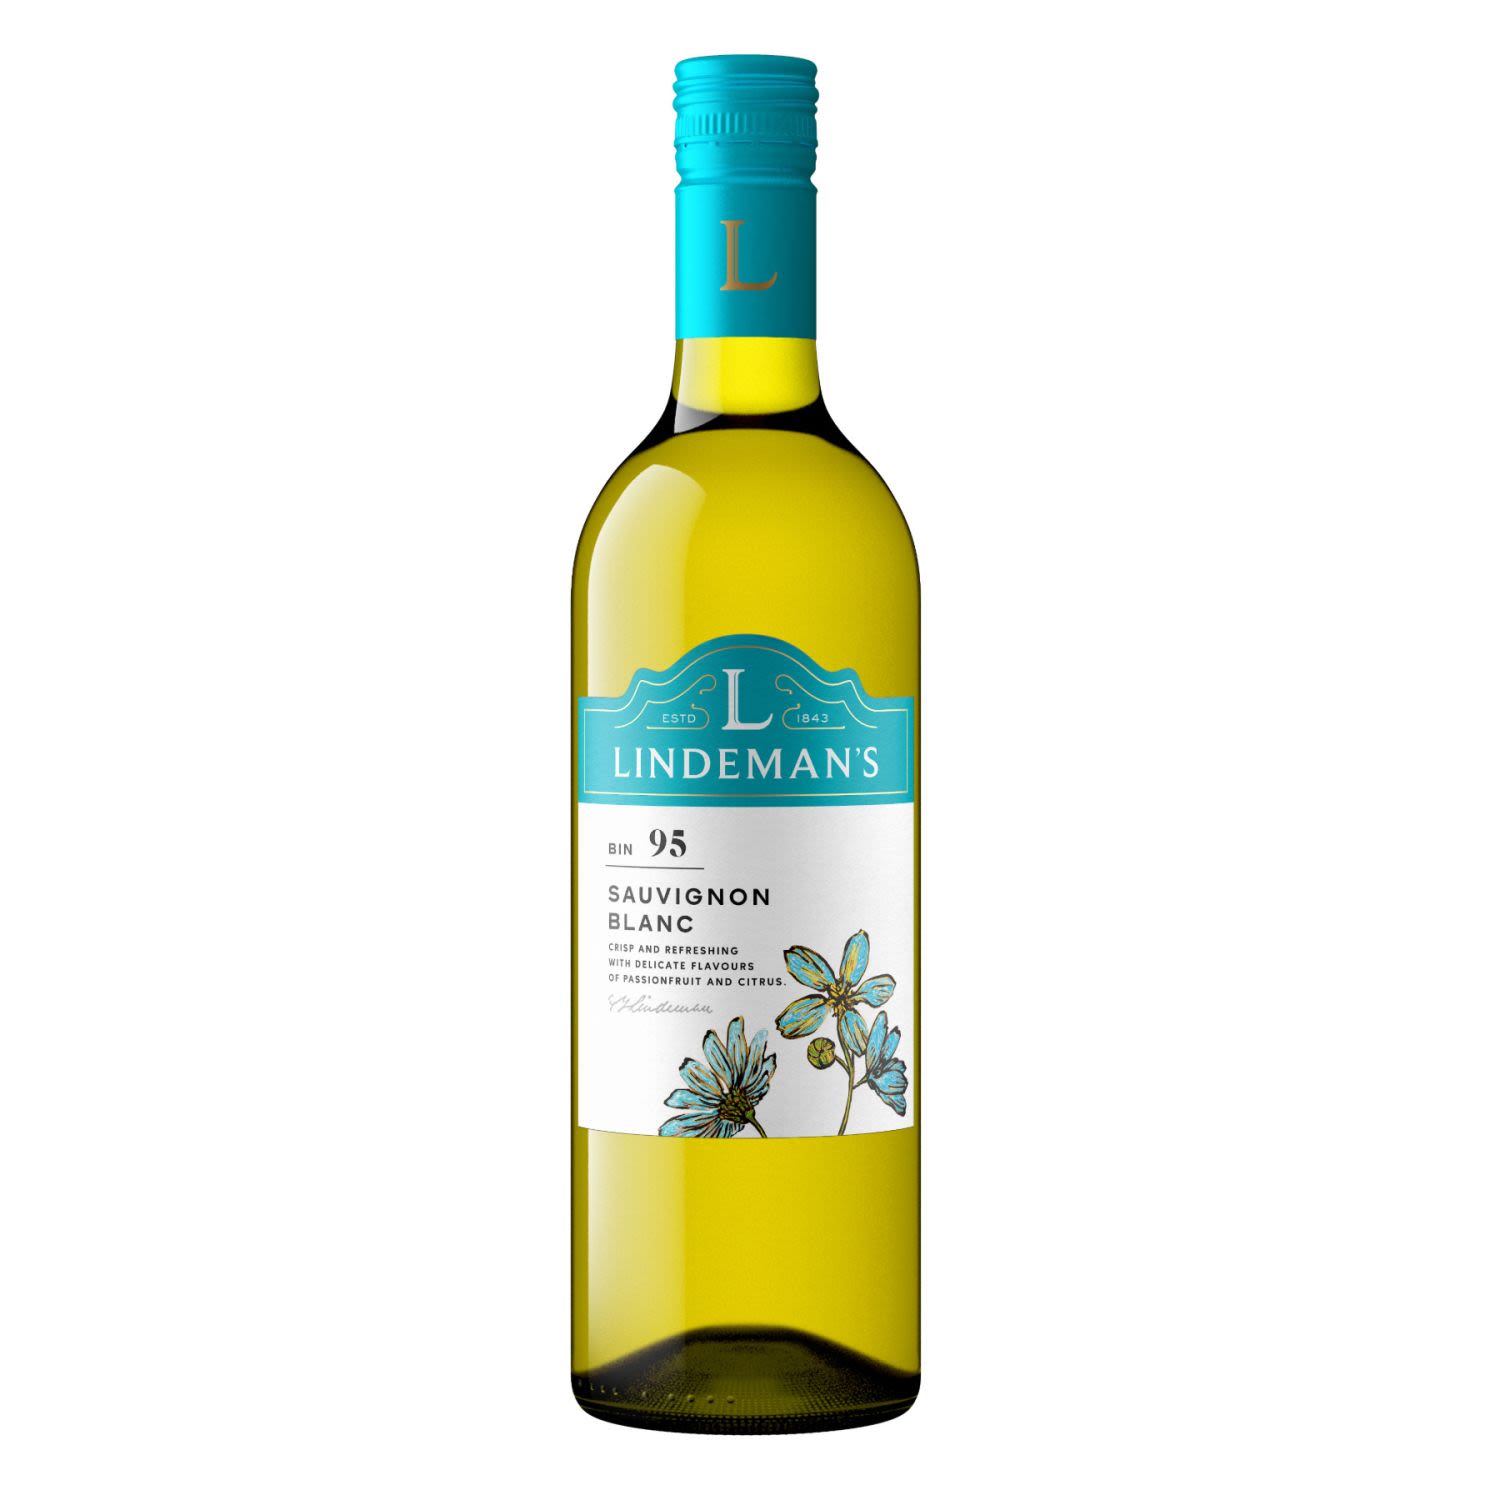 The bouquet shows typical fresh, floral, herbaceous & grassy characters with a touch of the tropical fruit. Medium bodied & elegant with lively citrus & gooseberry notes. The finish is long & elegant with a crisp finish.<br /> <br />Alcohol Volume: 13.00%<br /><br />Pack Format: Bottle<br /><br />Standard Drinks: 7.7</br /><br />Pack Type: Bottle<br /><br />Country of Origin: Australia<br /><br />Region: South Eastern Australia<br /><br />Vintage: '2019<br />